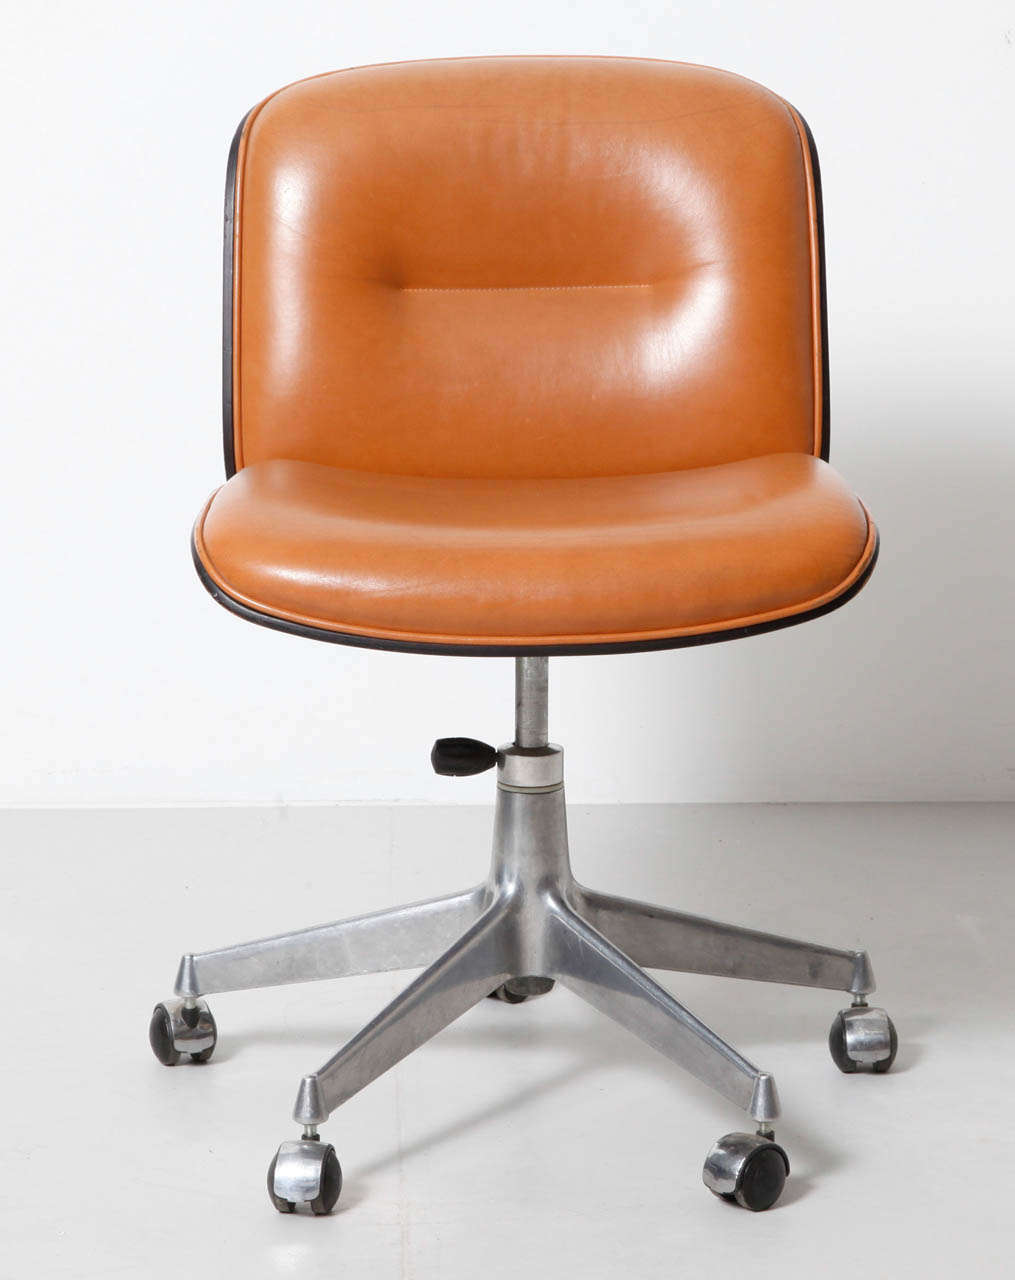 2 cognac adjustable/swivel office chairs in Brazilian rosewood and soft Italian leather designed by Ico Parisi for M.I.M. (Mobili Italiani Moderni) Roma 1970.
Chairs have cast 5 star aluminium base.

All chairs are in a very good vintage